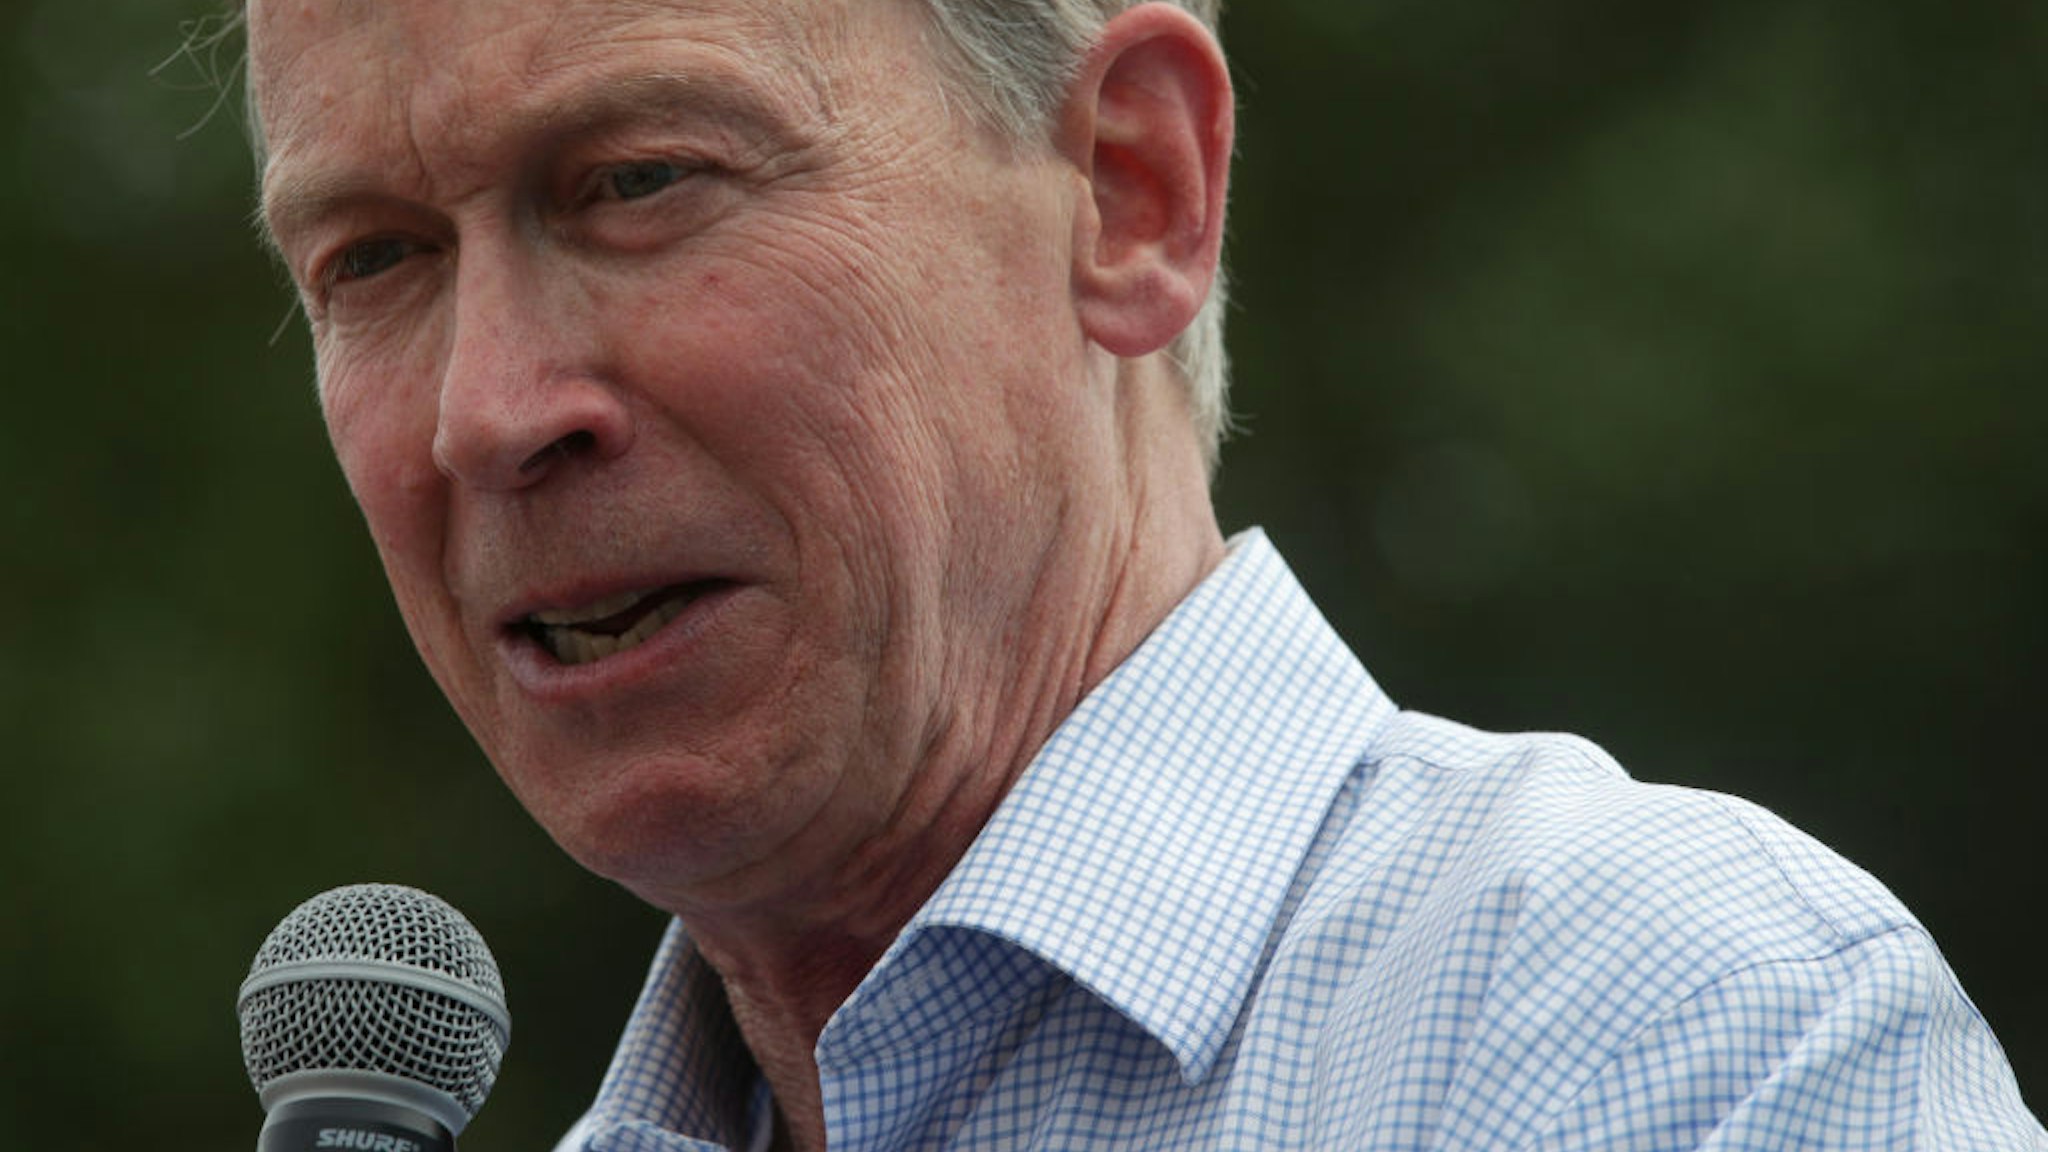 DES MOINES, IOWA - AUGUST 10: Democratic presidential candidate and former Governor of Colorado John Hickenlooper delivers a campaign speech at the Des Moines Register Political Soapbox at the Iowa State Fair on August 10, 2019 in Des Moines, Iowa. 22 of the 23 politicians seeking the Democratic Party presidential nomination will be visiting the fair this week, six months ahead of the all-important Iowa caucuses.